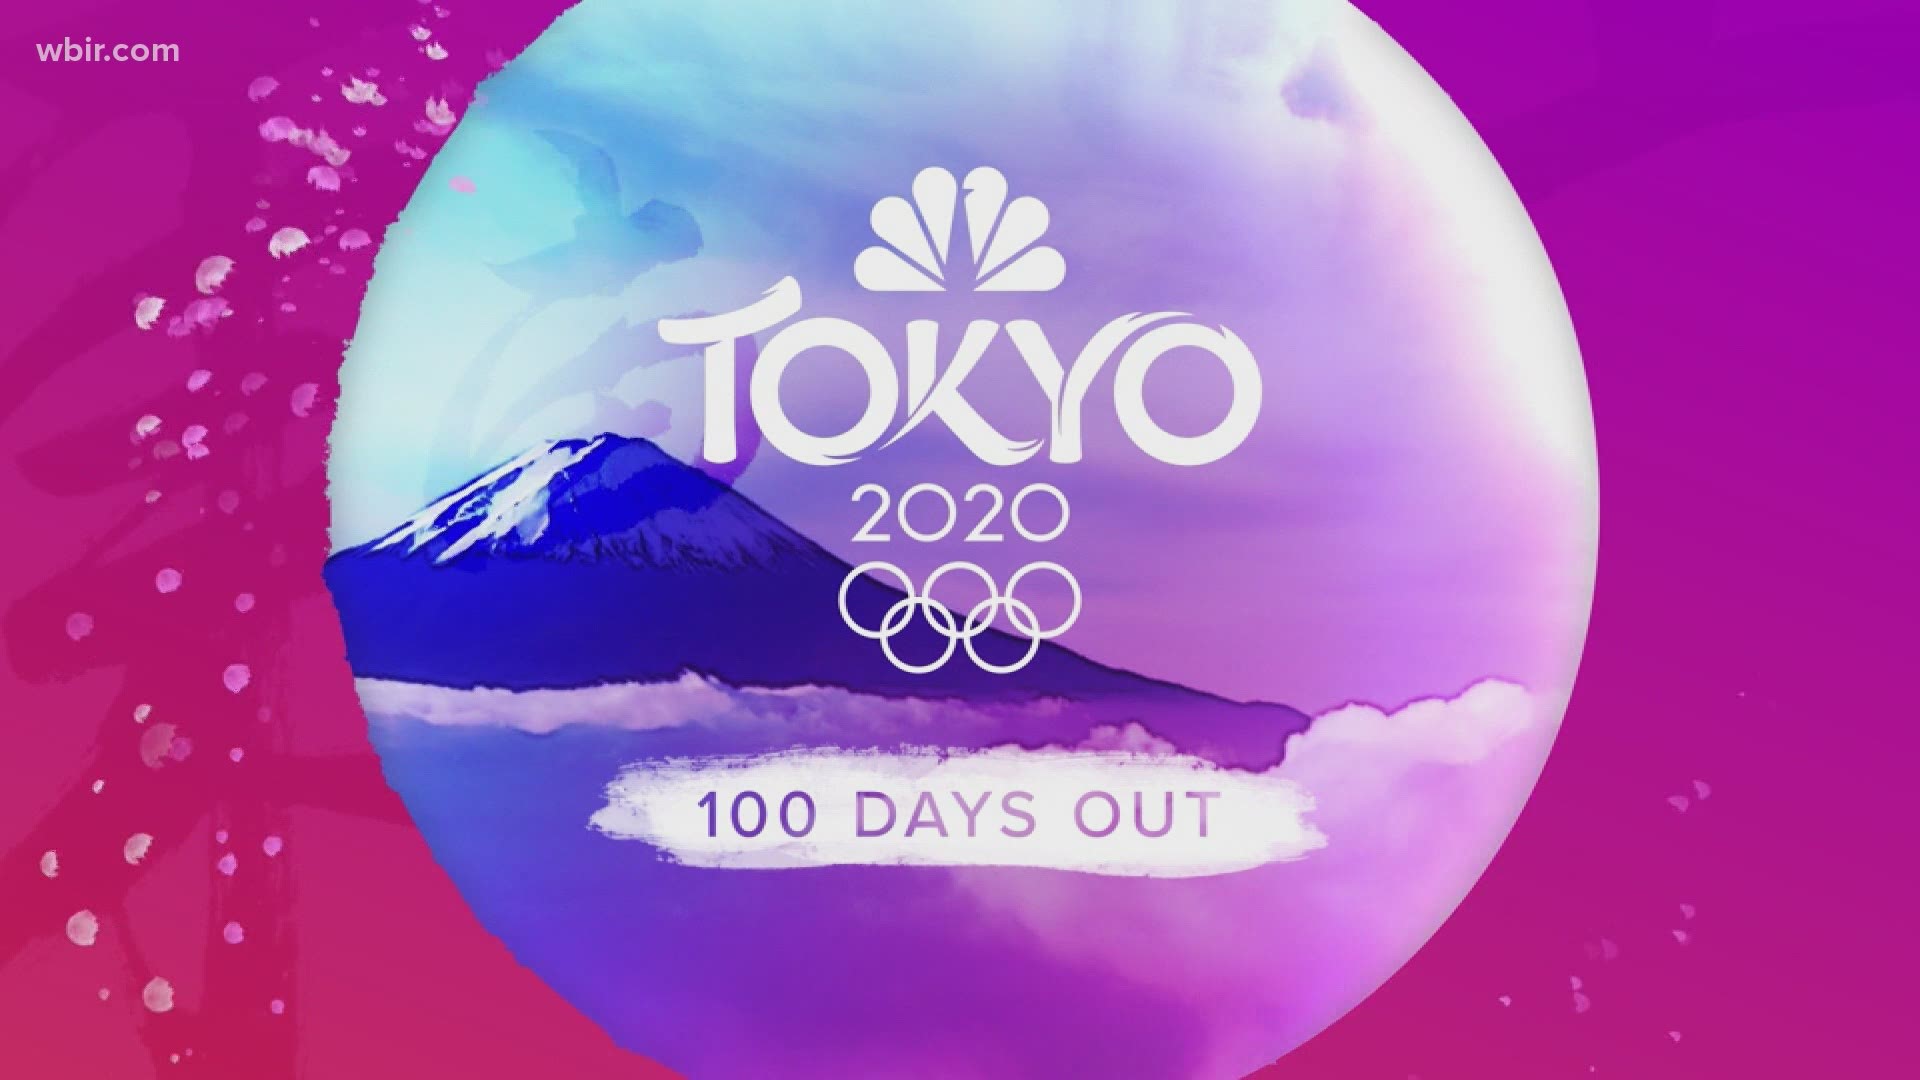 Today marks 100 days until the Tokyo Summer Olympics!